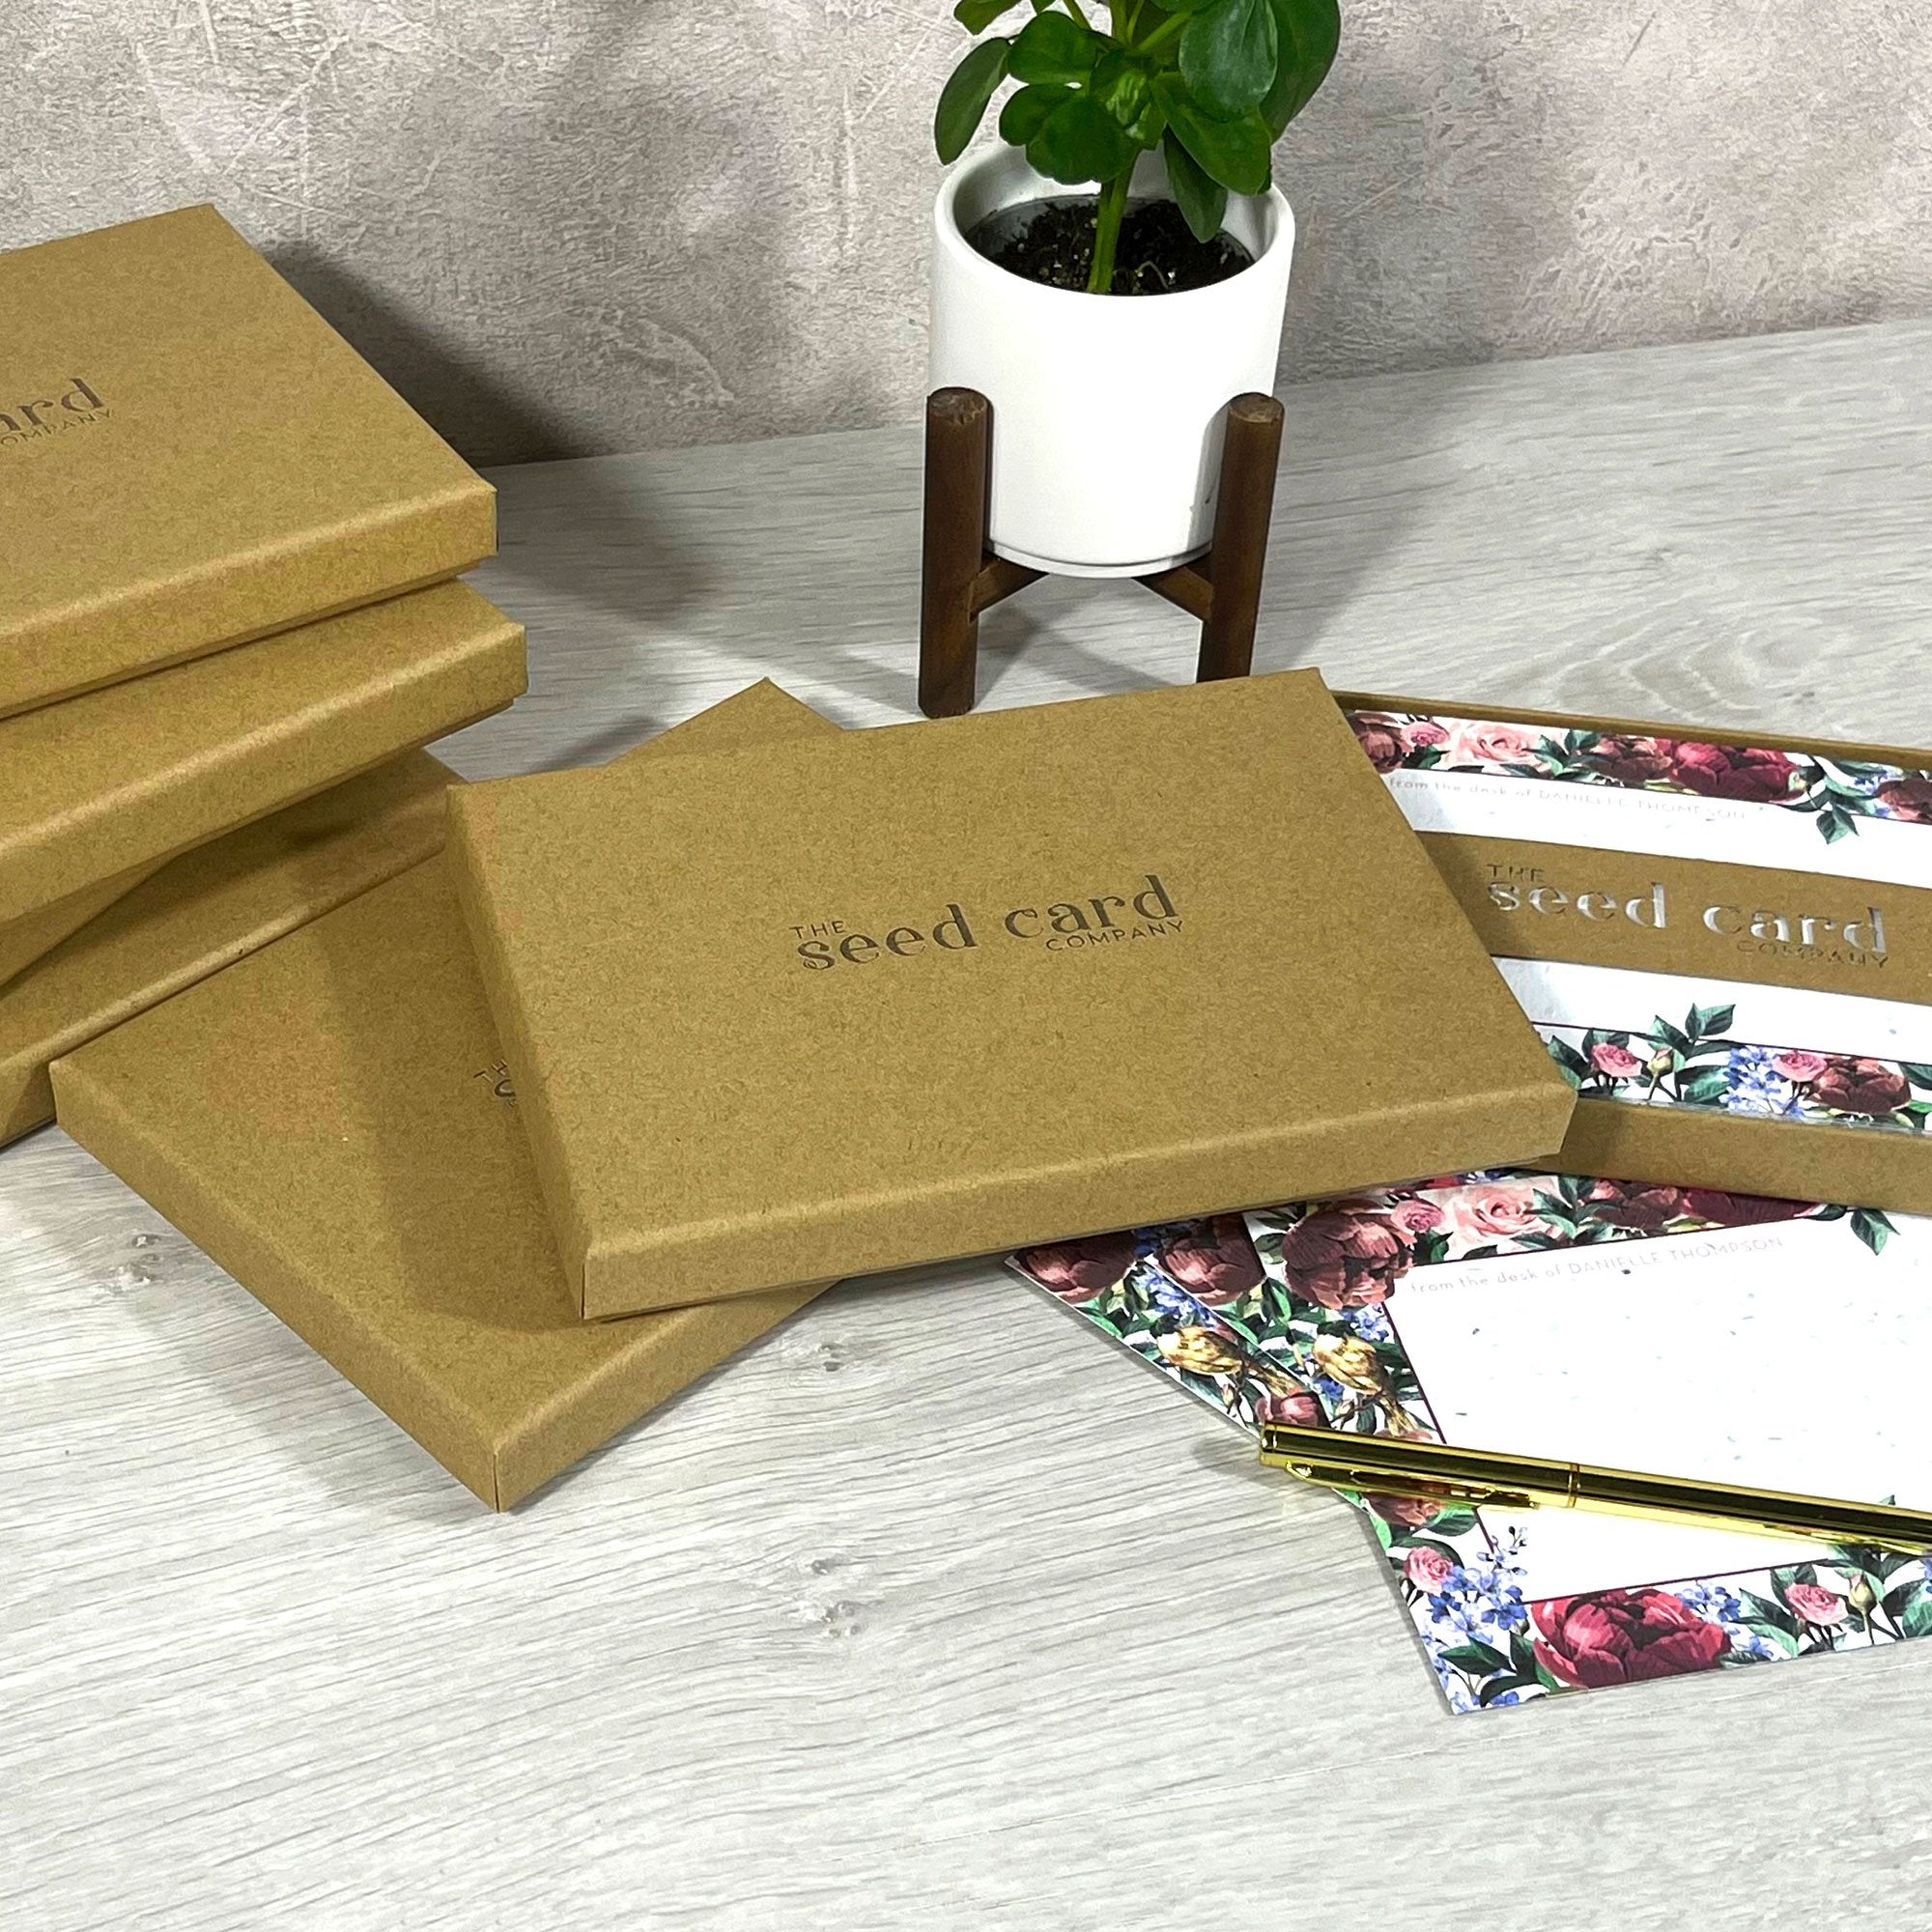 Shop online Little Shapes - 100% biodegradable seed-embedded cards Shop -The Seed Card Company